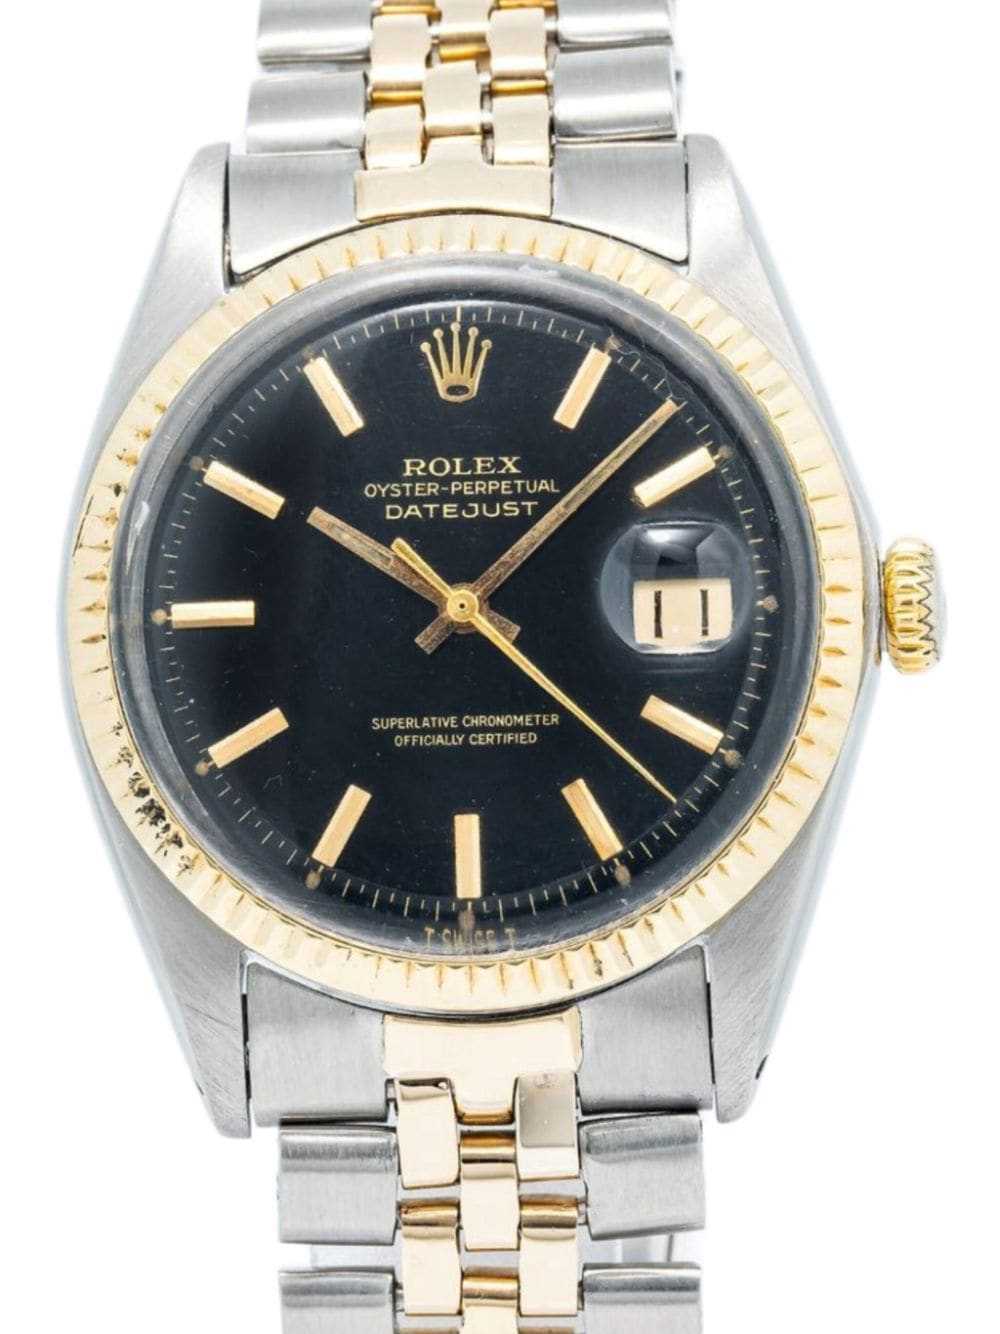 Rolex pre-owned Datejust 36mm - Black - image 2